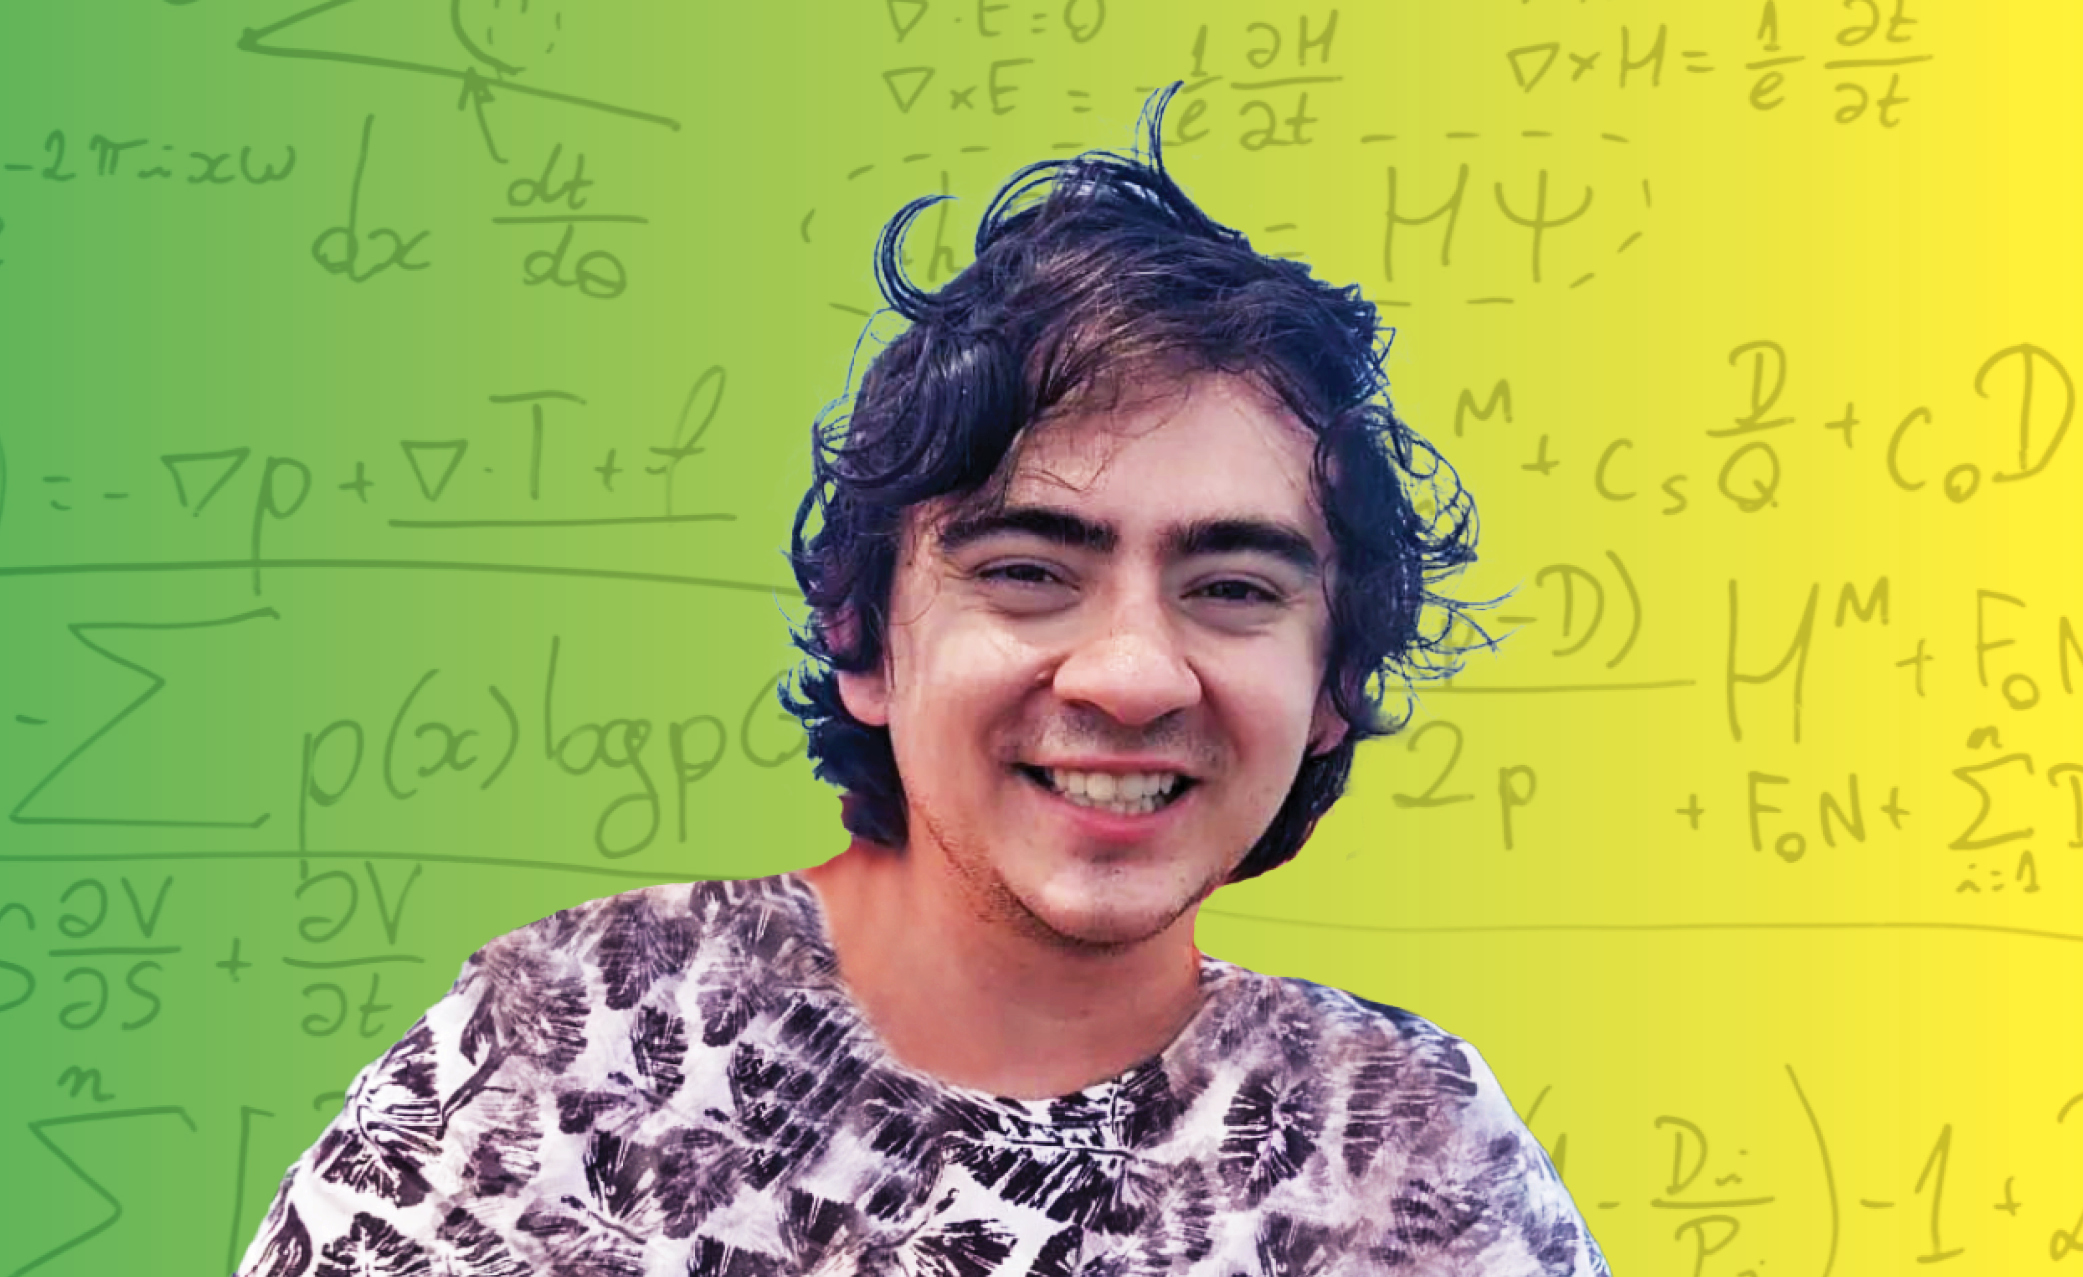 Photo of Jose Esparza over a background of math equations colored in yellow and green